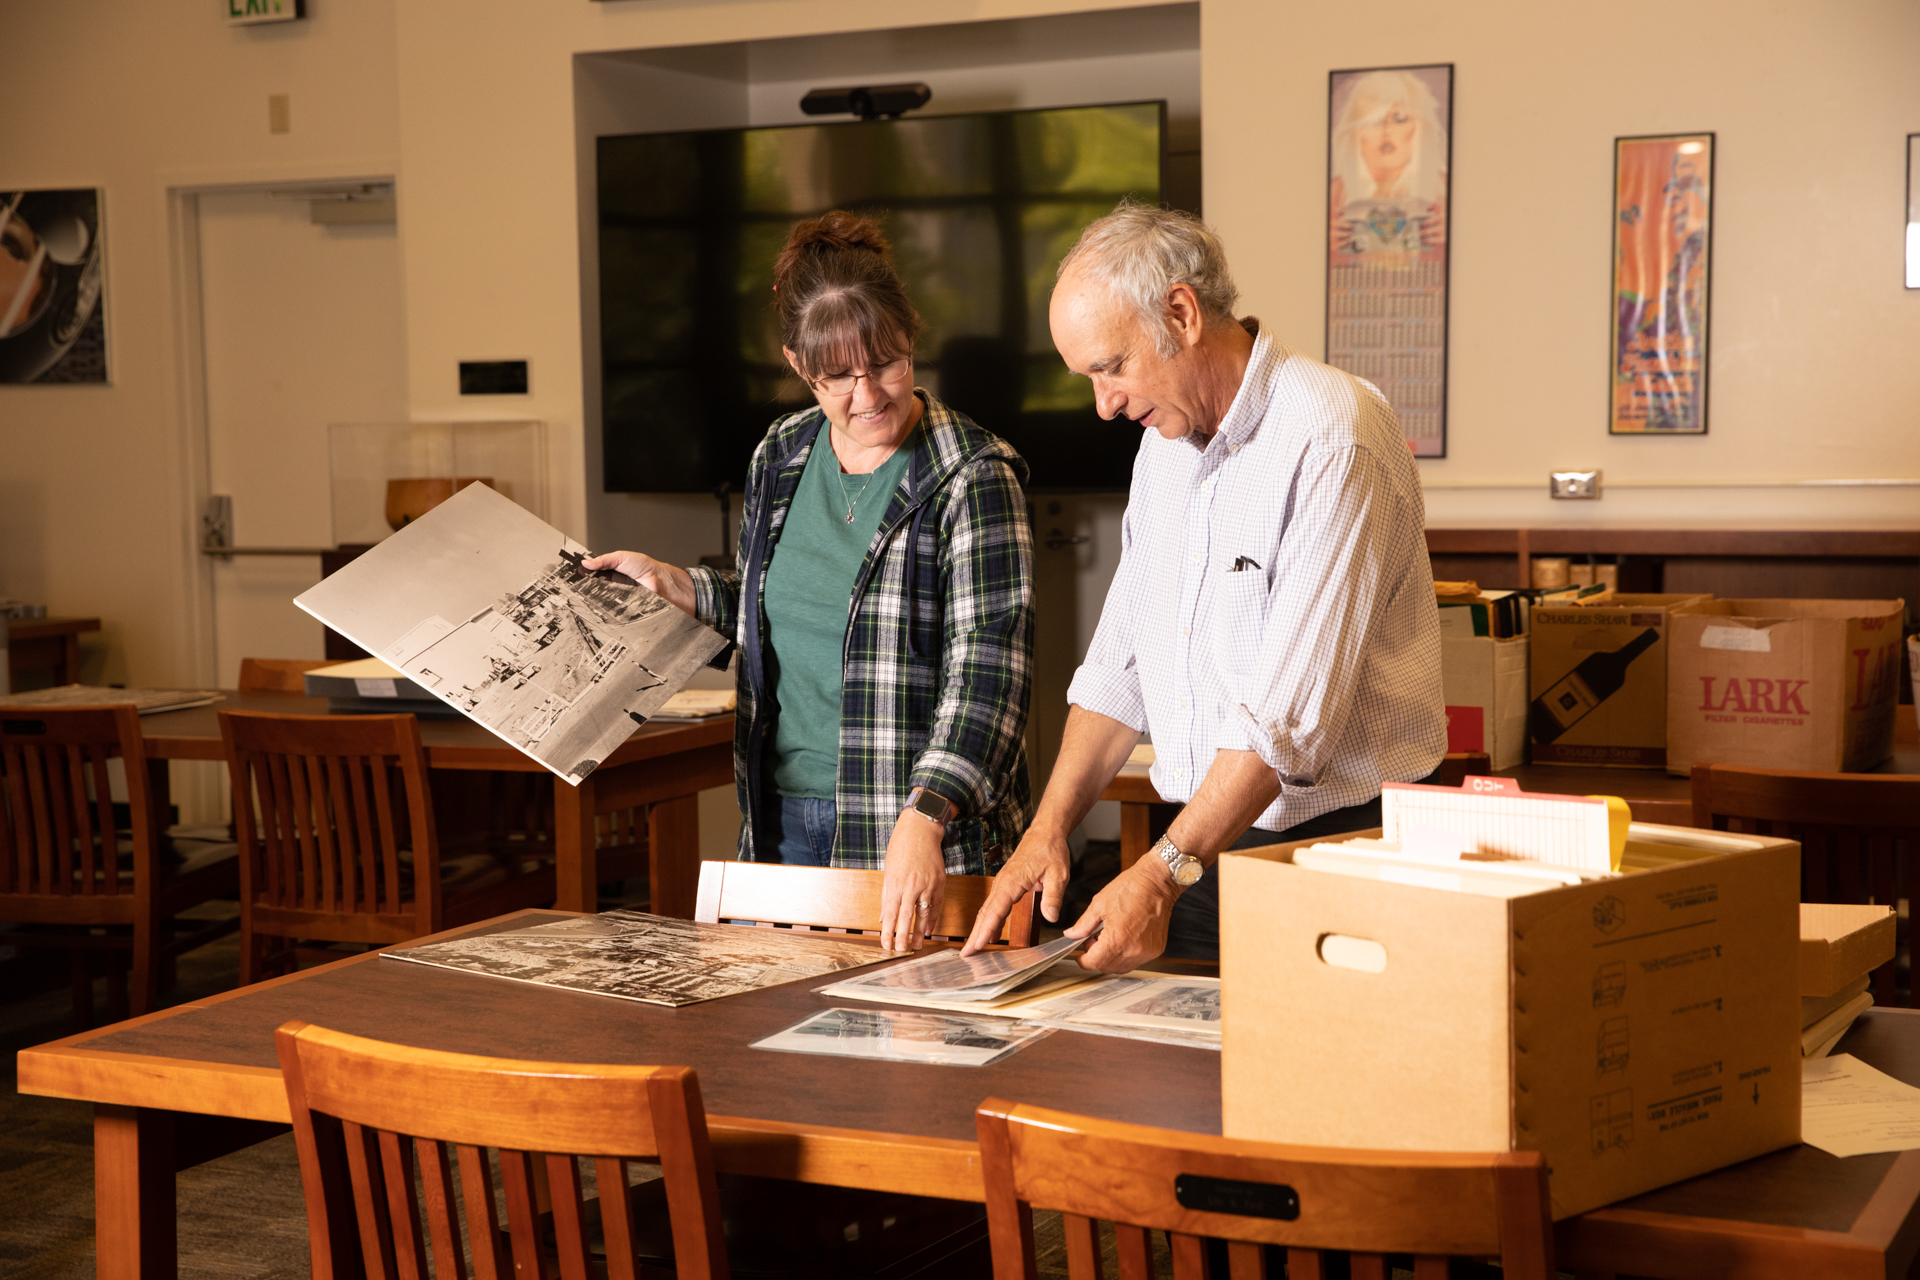 University Library Archives staff rummage through boxes of historical images of the University to find items for a 75th Anniversary exhibit.